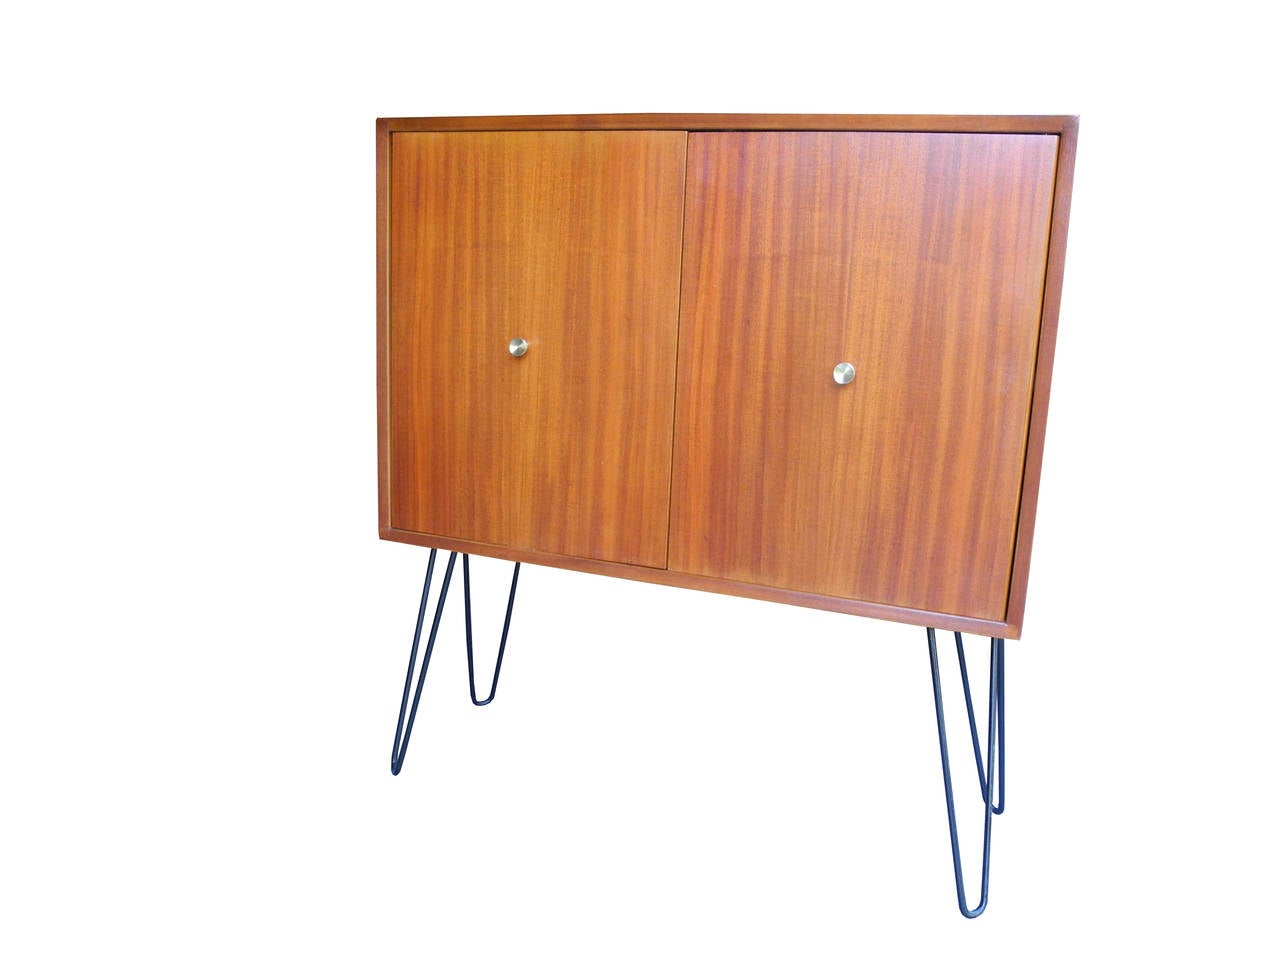 Award winning architect, Morris Sanders designed this cabinet made of mahogany with solid brass pulls. It sits on hairpin metal legs and is 
equipped with one adjustable shelf inside a shallow cabinet.